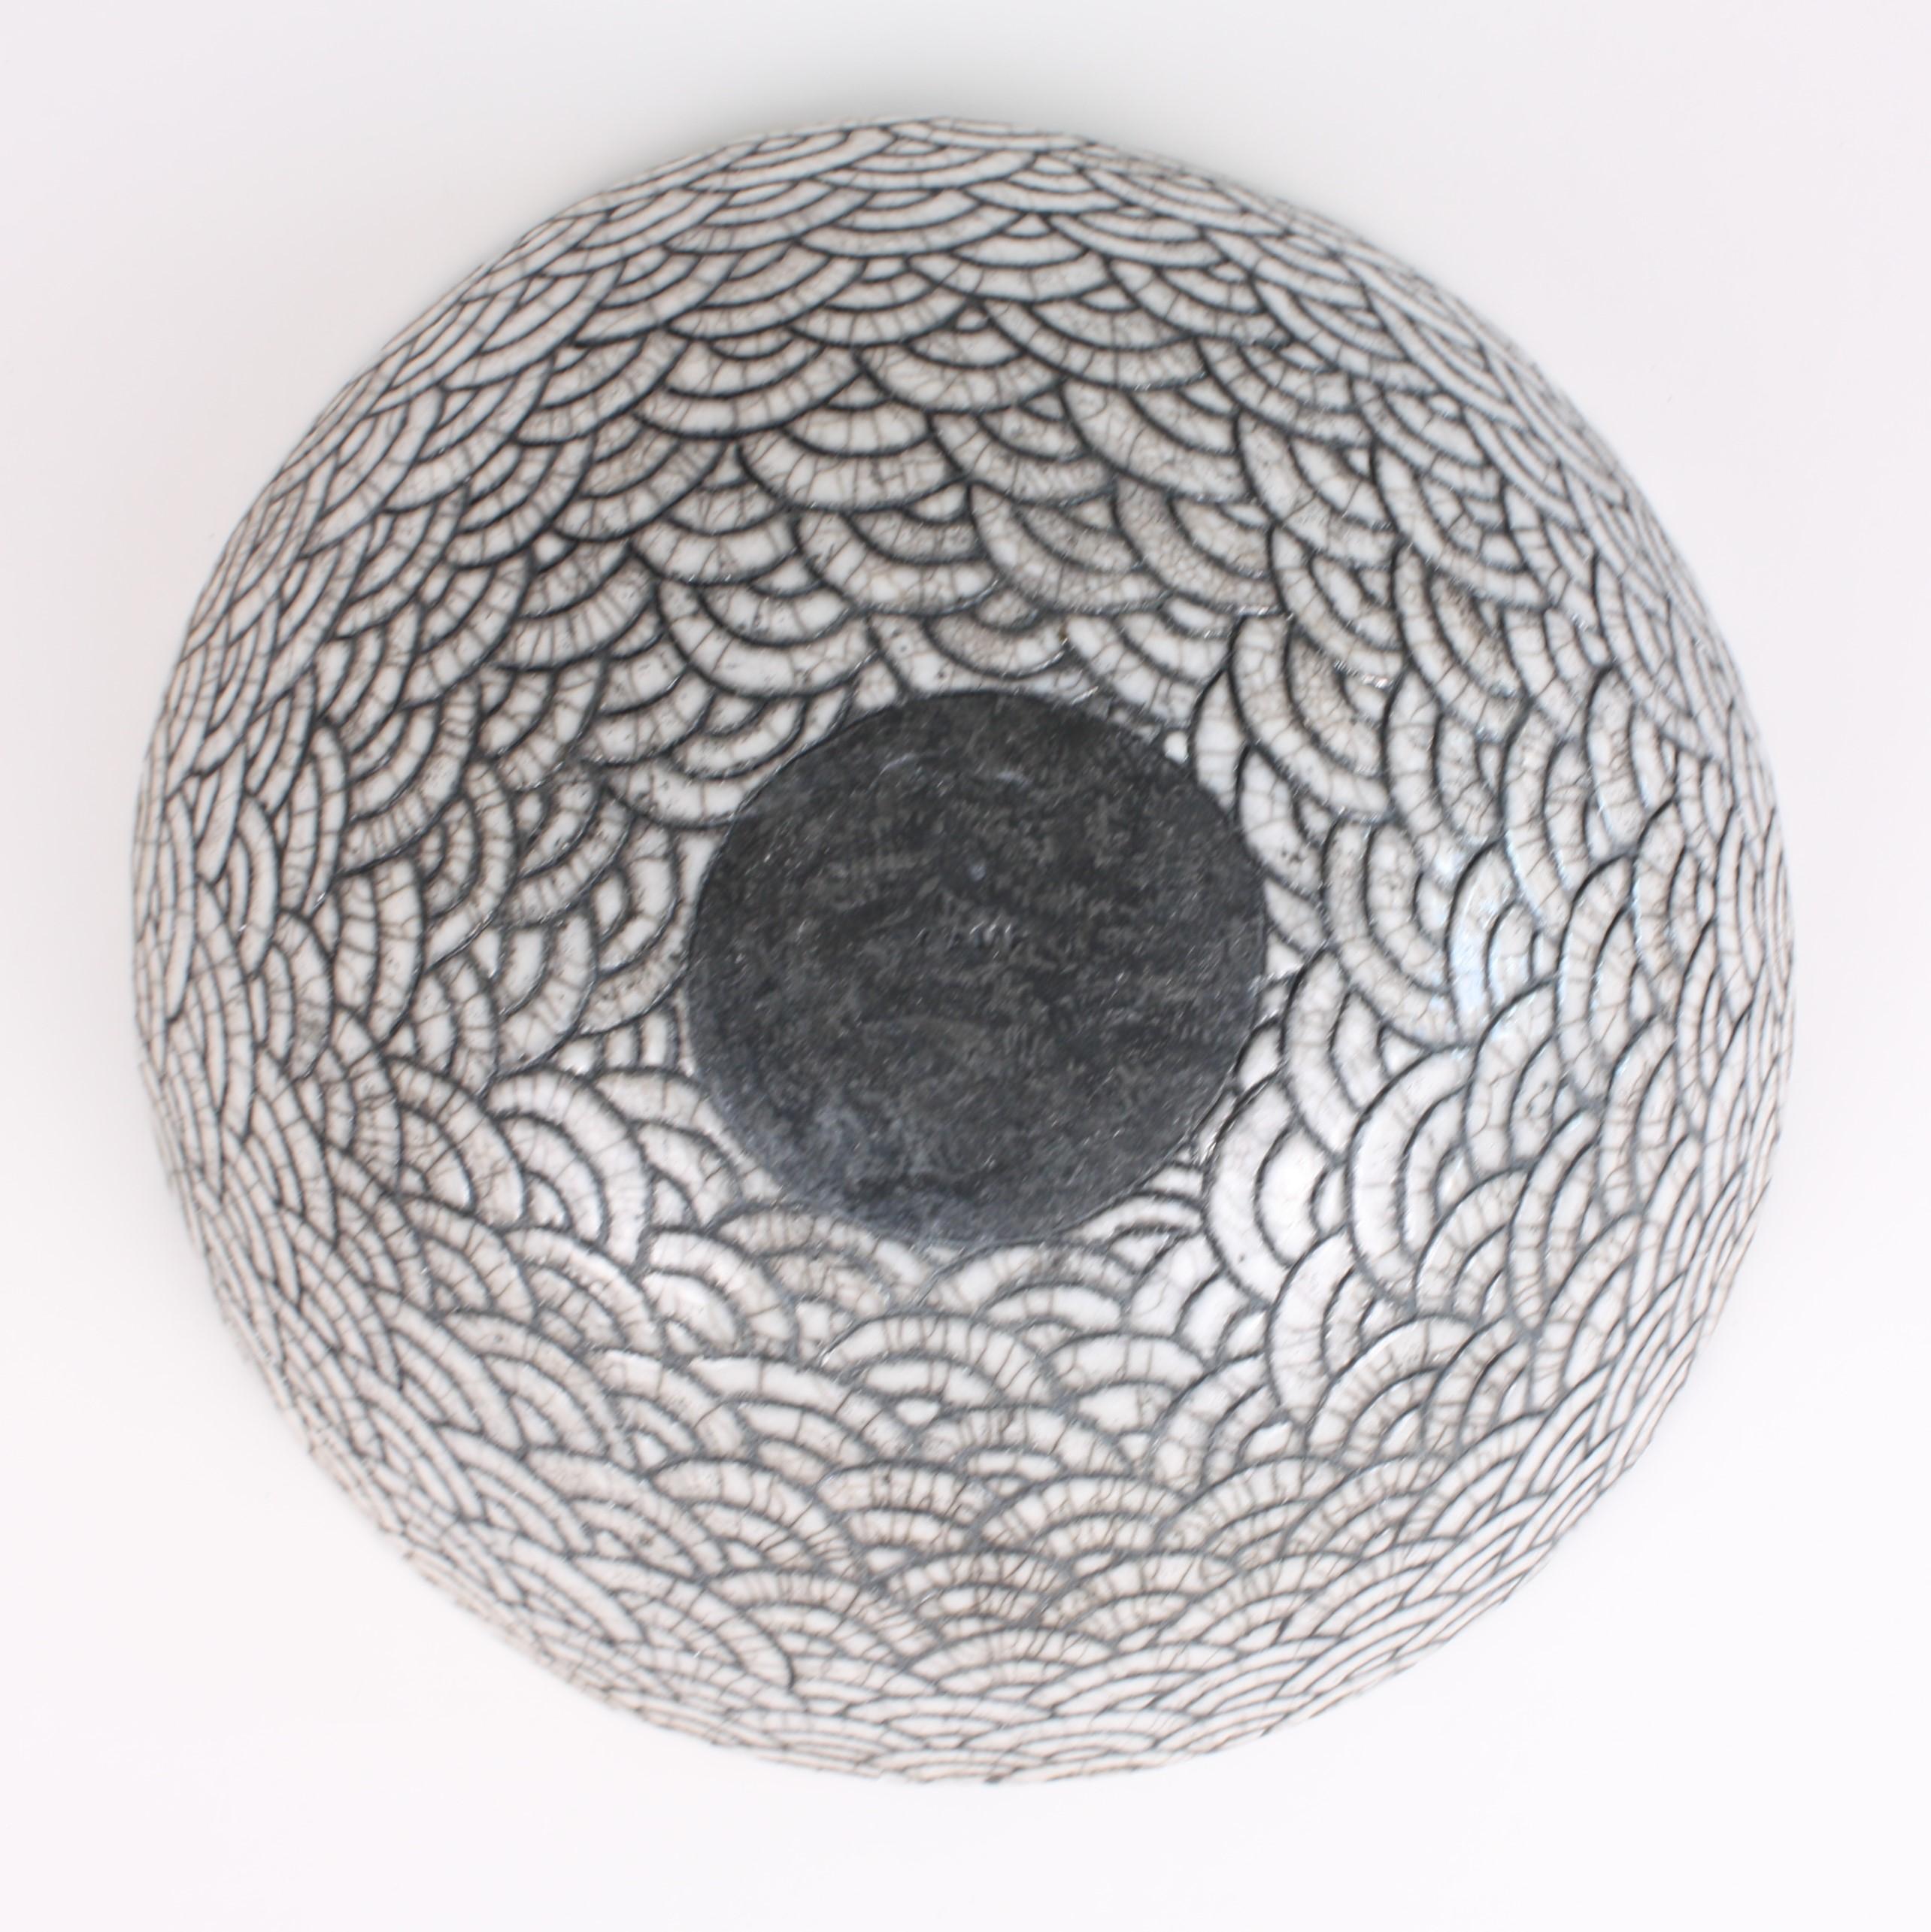 Contemporary Black and White Ceramic Bowl, Coupe Japonaise III 1